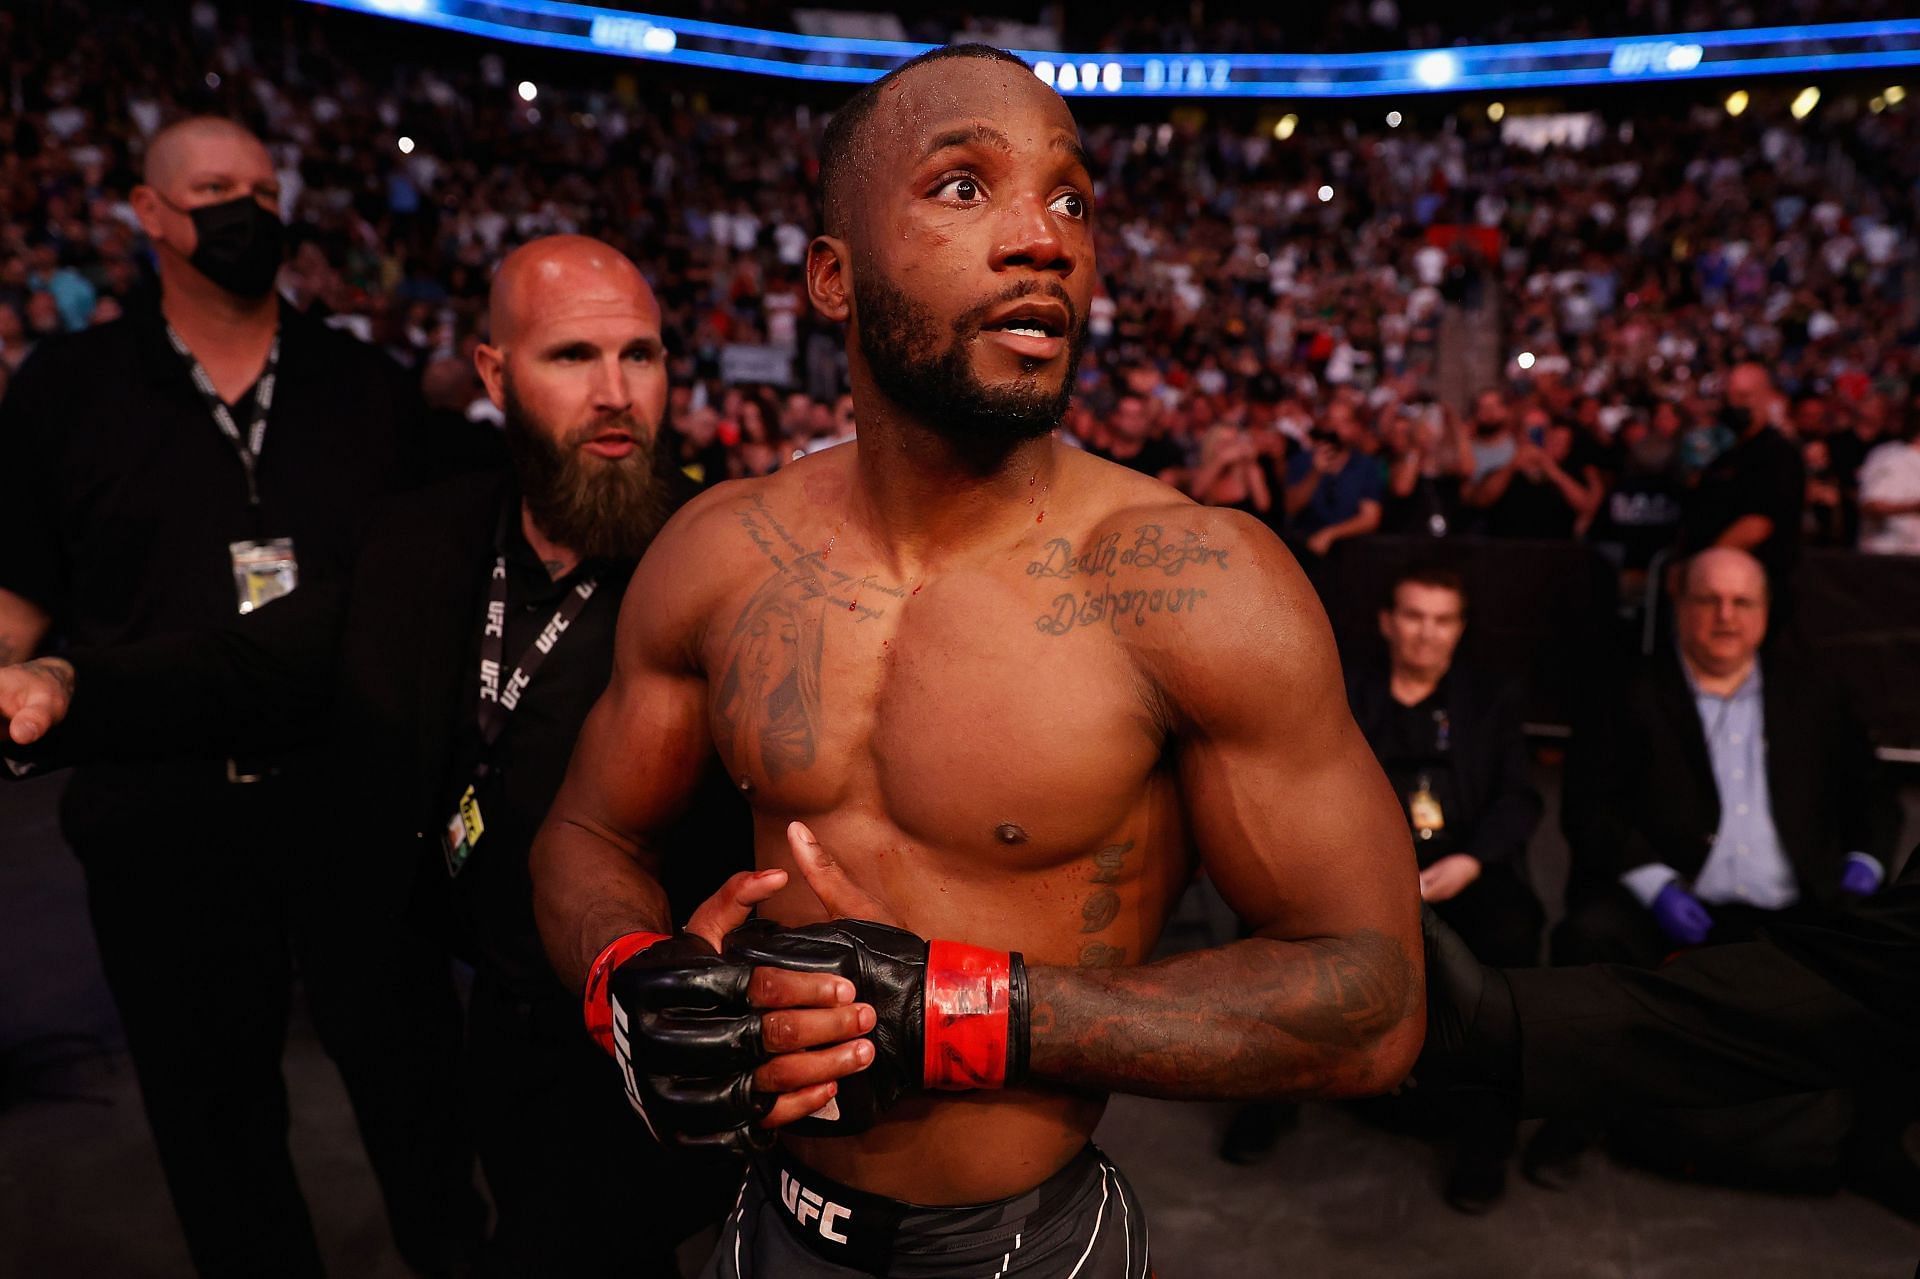 Given a title shot is likely to come in 2022, Leon Edwards might have a genuine shot of becoming welterweight champion